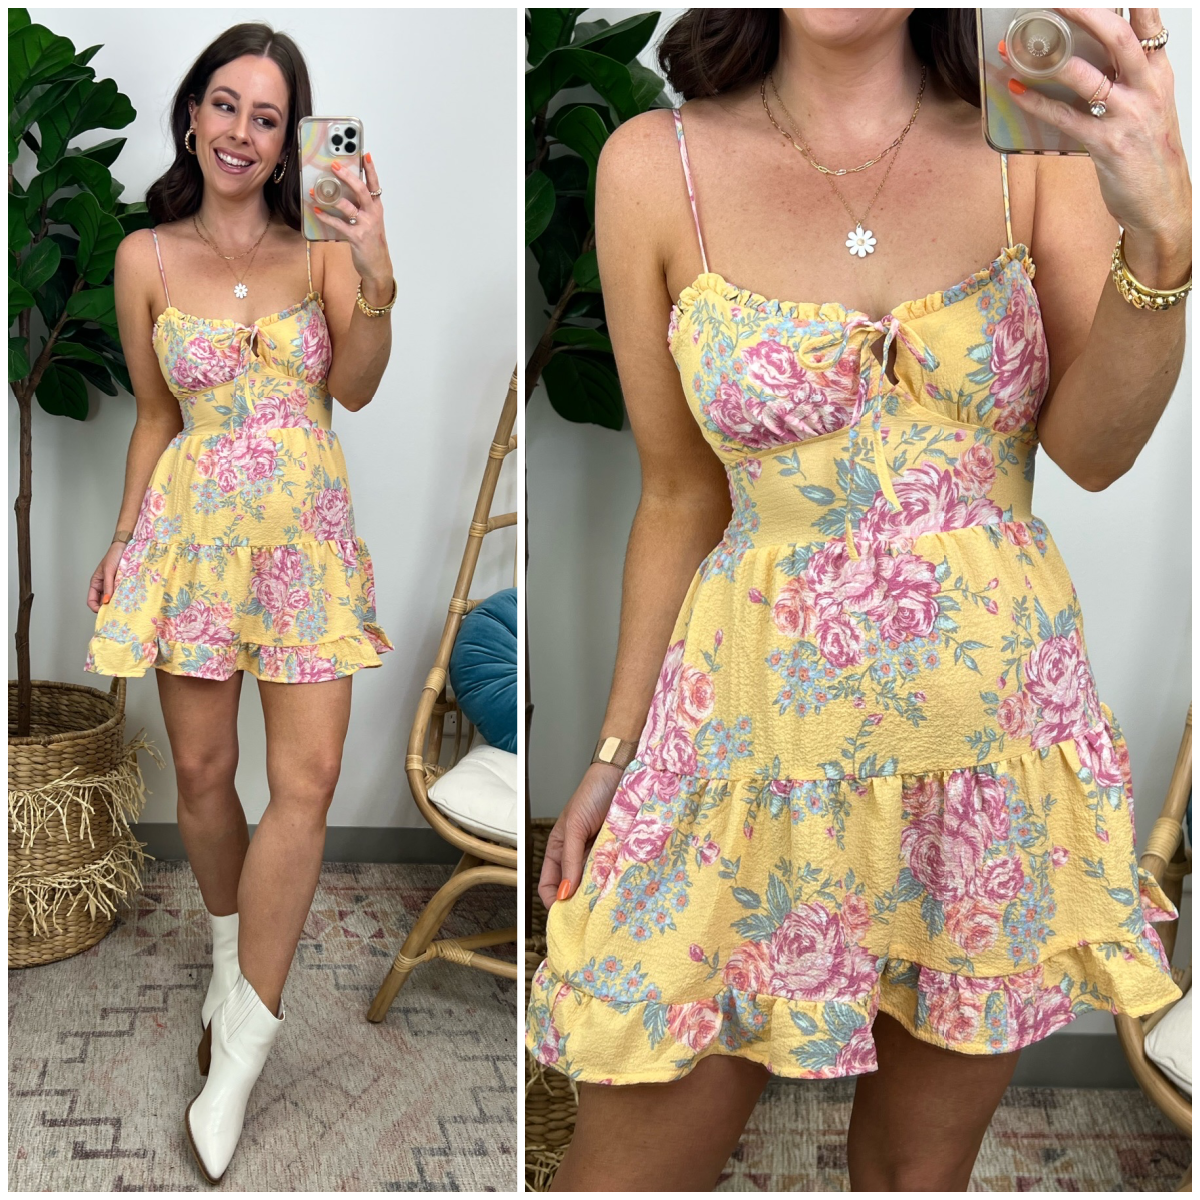  Heart of Marigold Floral Front Tie Dress - Madison and Mallory